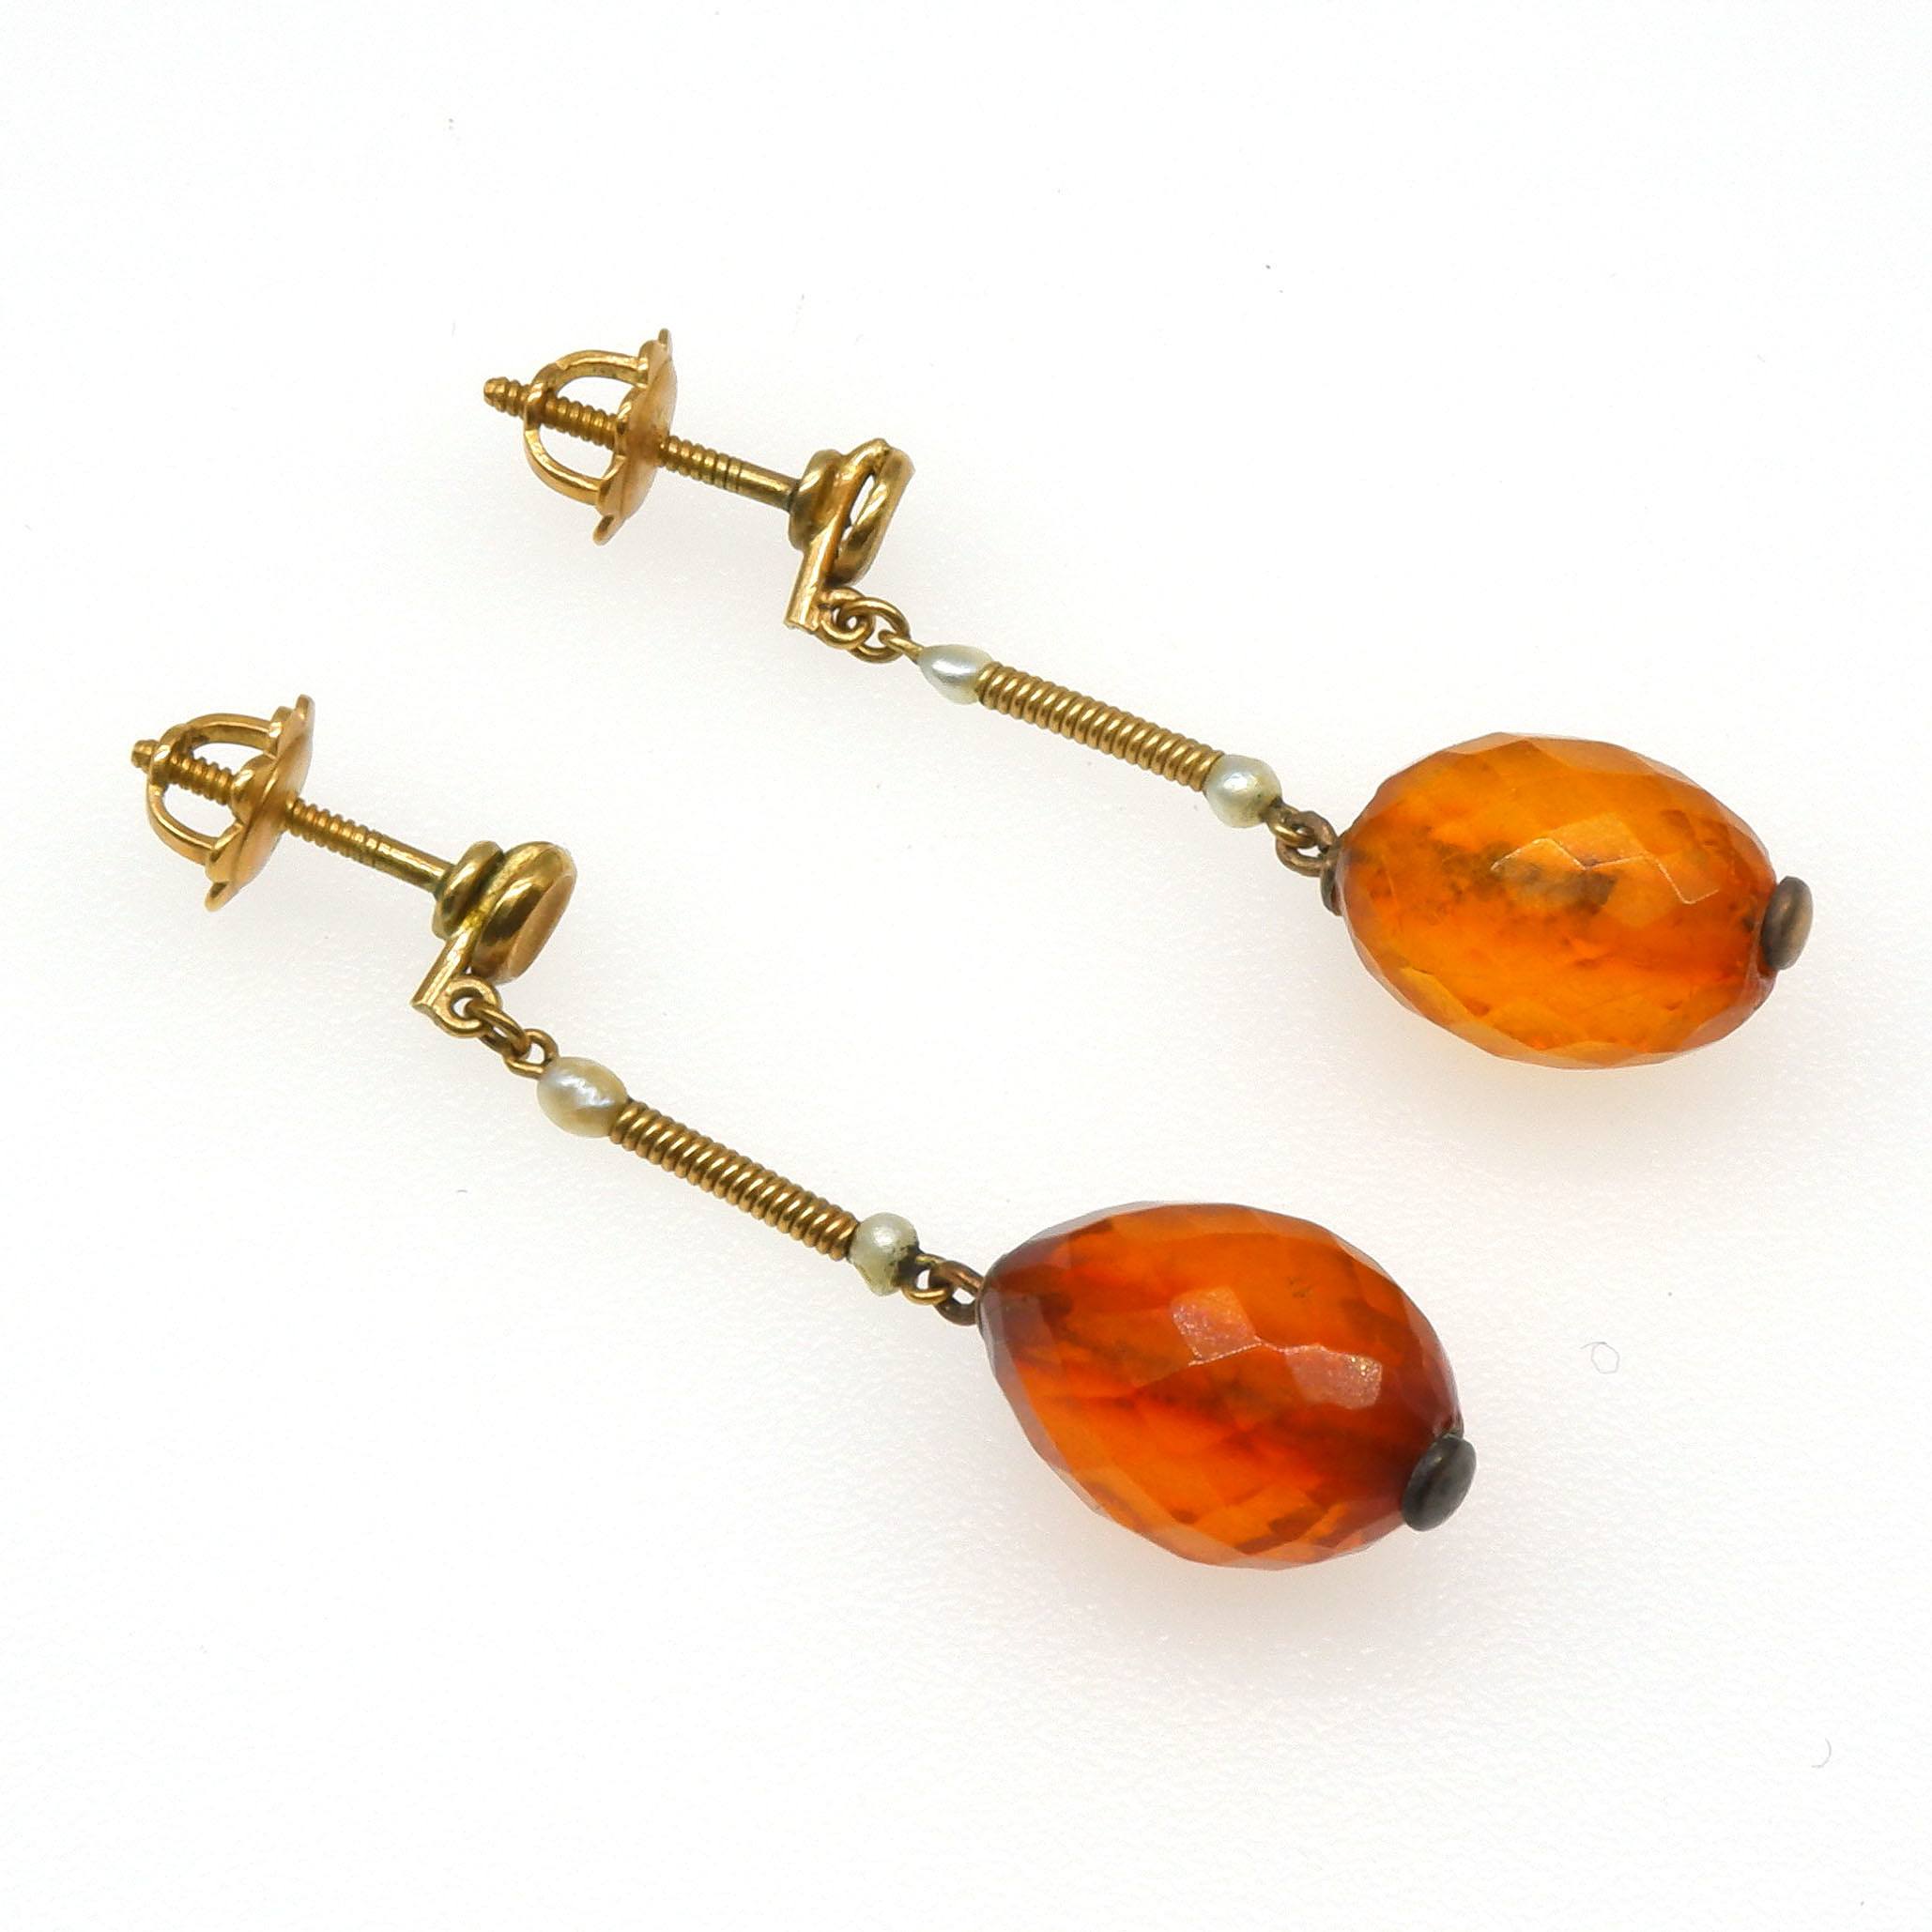 '18ct Yellow Gold Earrings with Facetted Oval Amber Bead Dropped from a Wire Bar with Two Natural Seed Pearls'